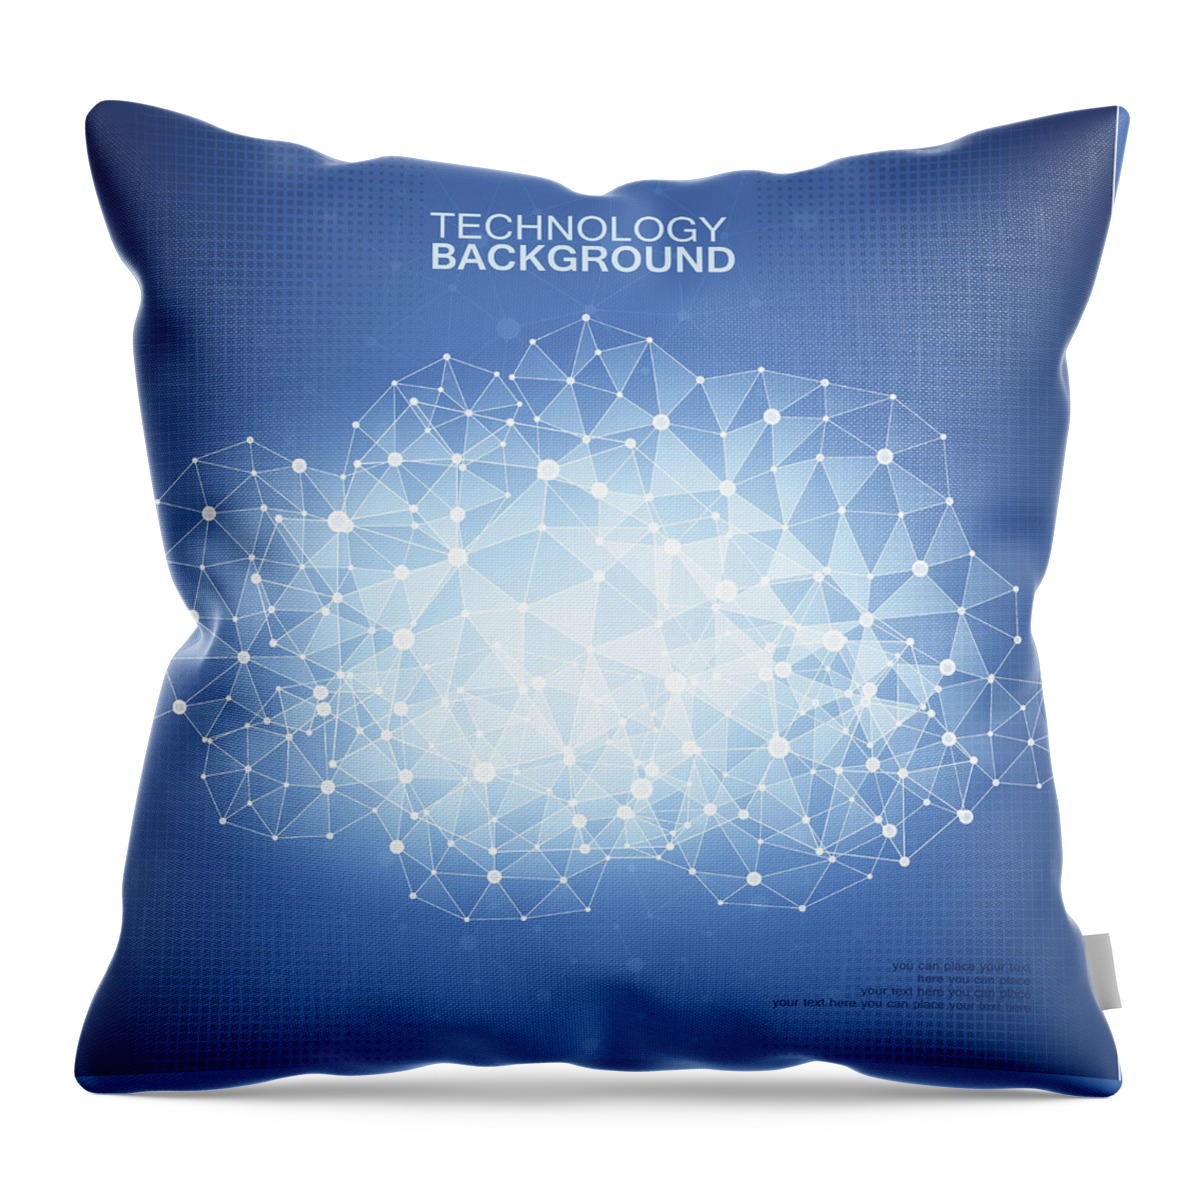 Internet Throw Pillow featuring the digital art Technology Background by A-r-t-i-s-t